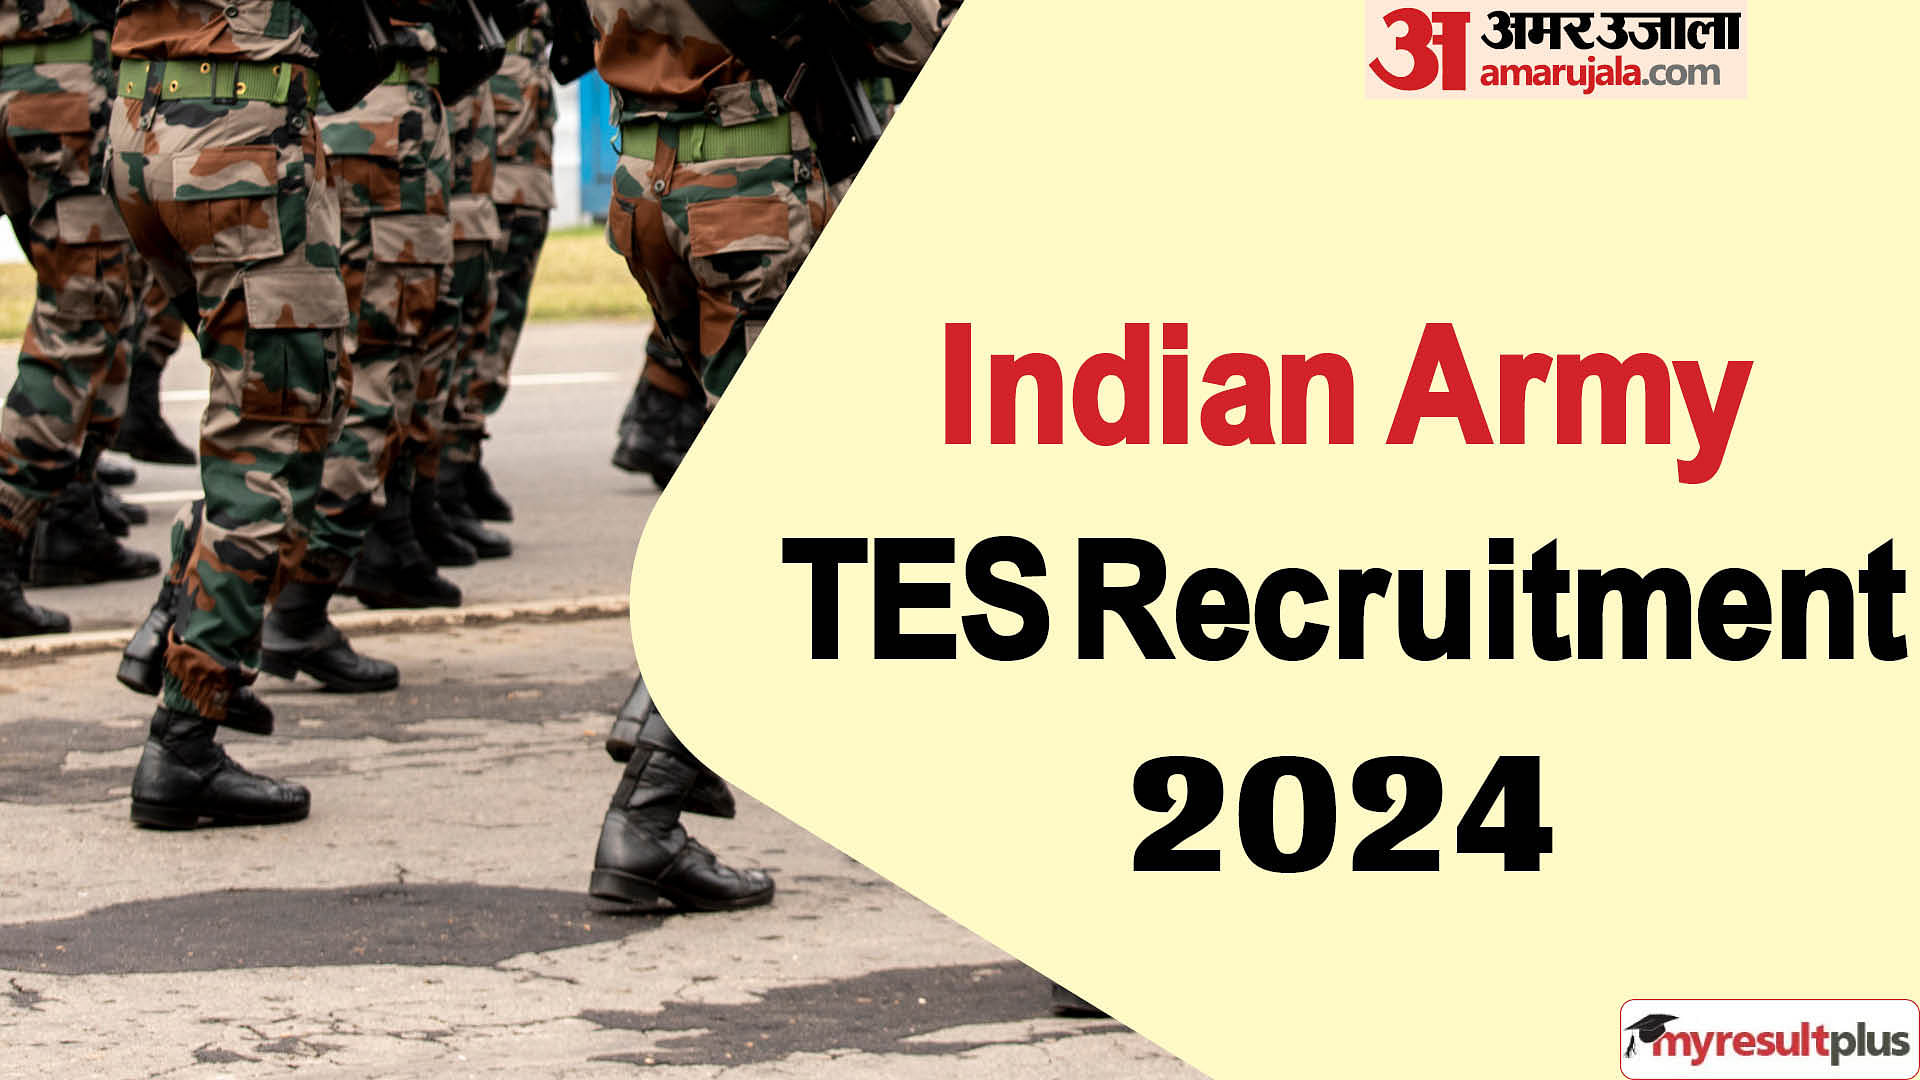 Army TES Recruitment 2024 registration window opening soon: Check eligibility, vacancy, Read all details here